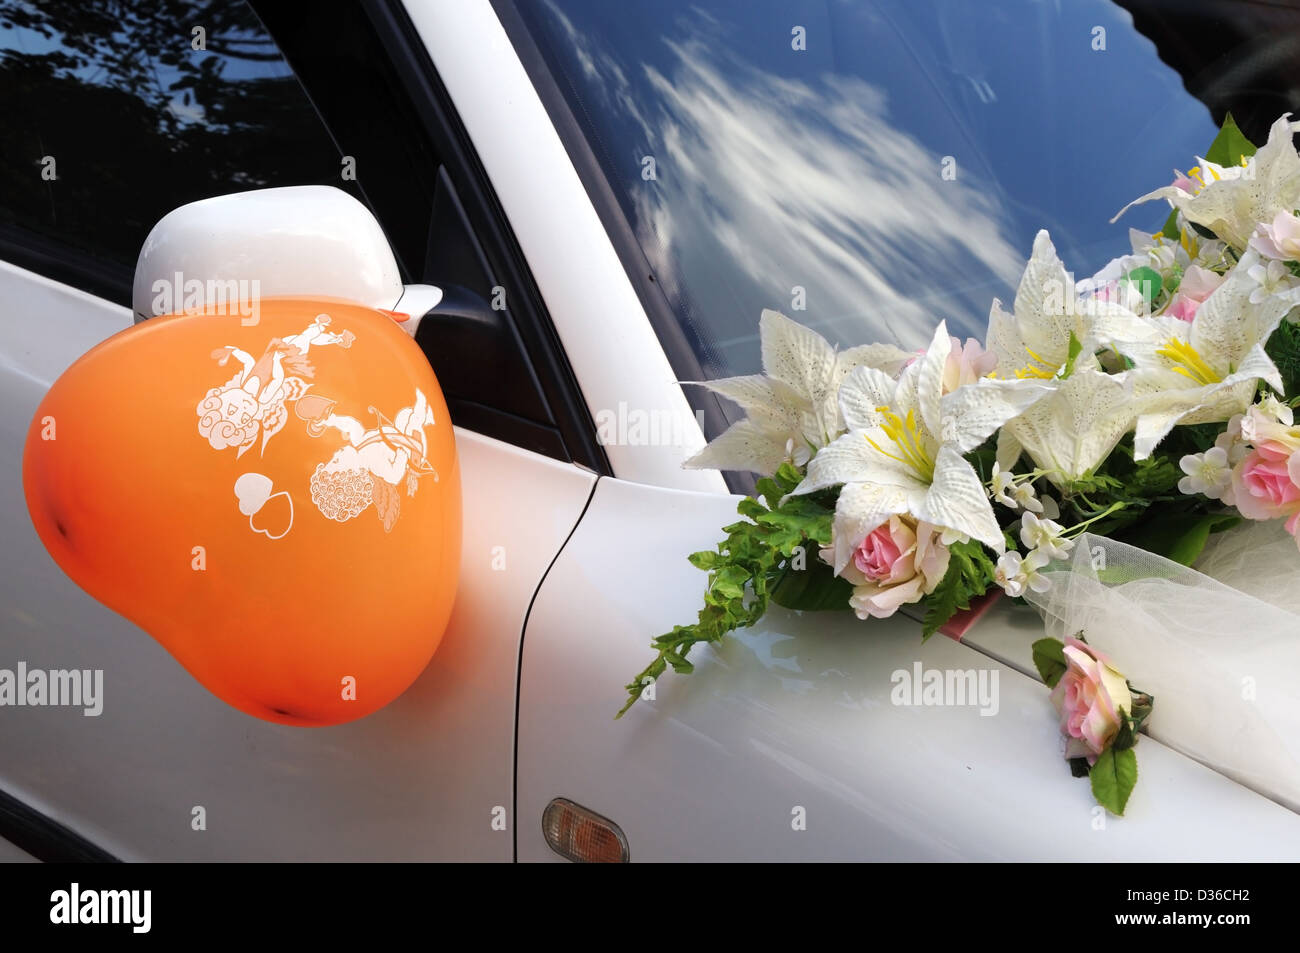 Wedding car decoration with flowers and ball Stock Photo - Alamy